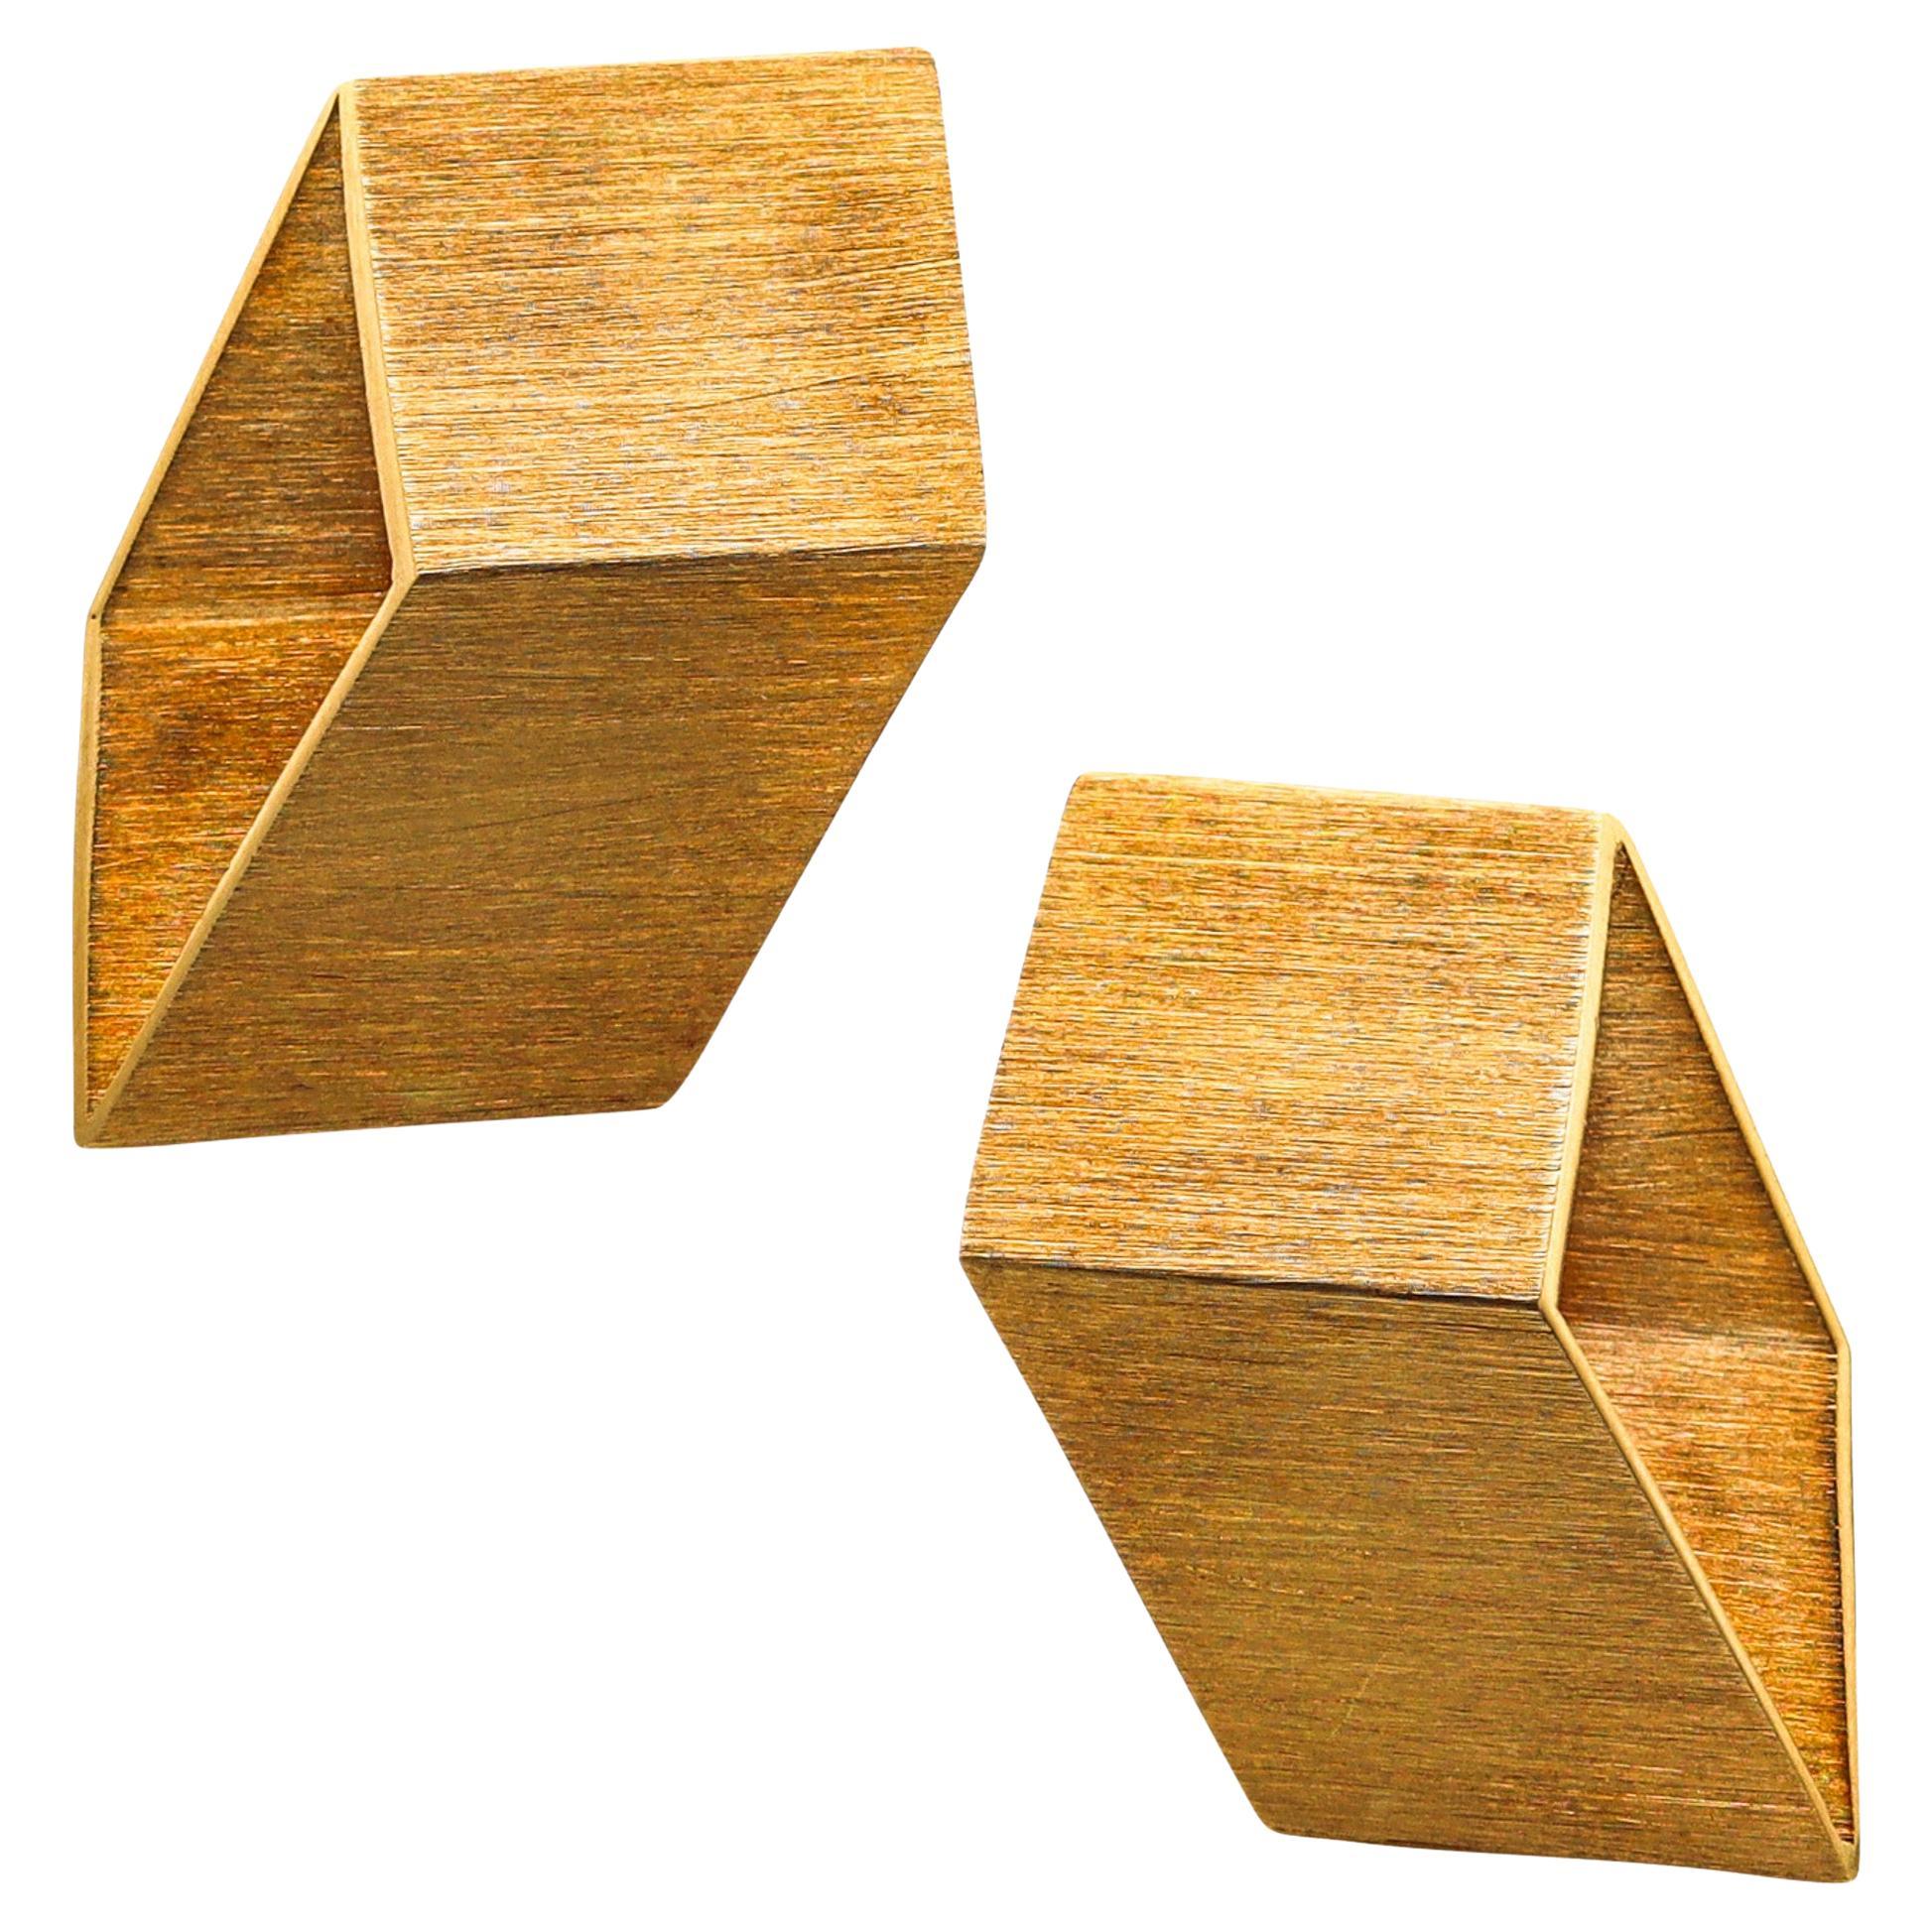 Giampaolo Babetto 1984 Artistic Geometric Earrings In Brushed 18Kt Yellow Gold